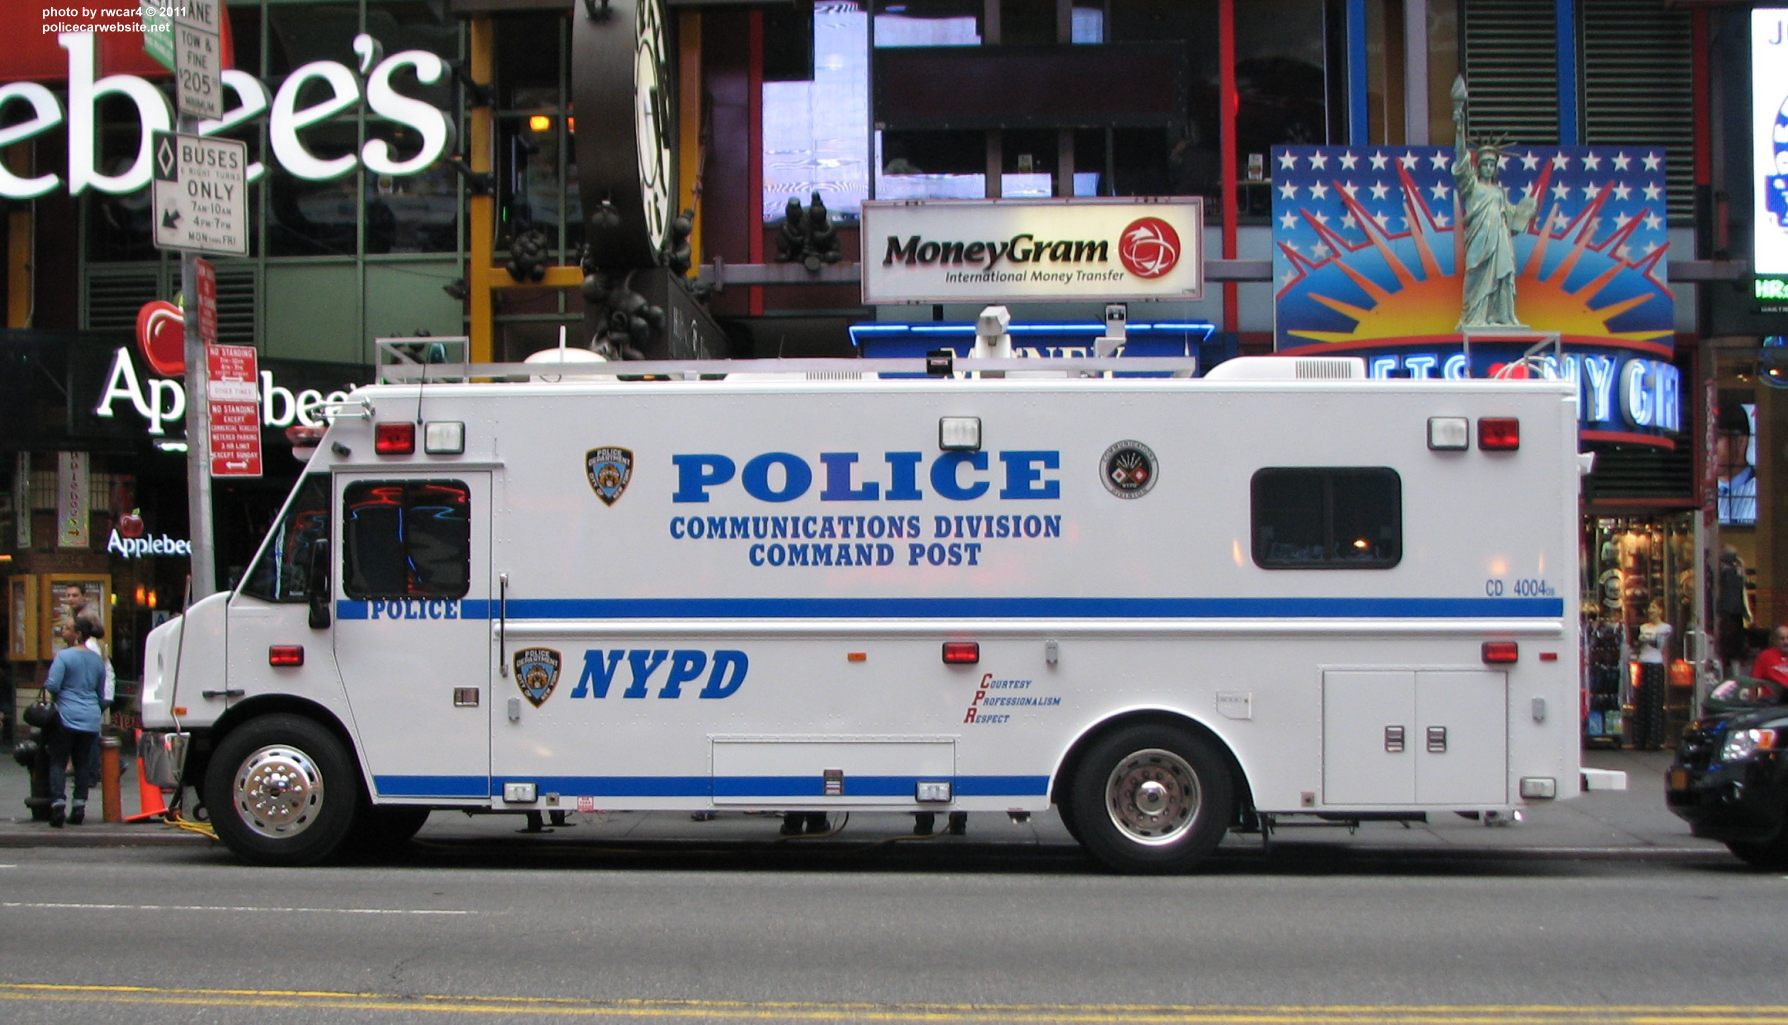 NYPD_Freightliner_Command_Post.jpg